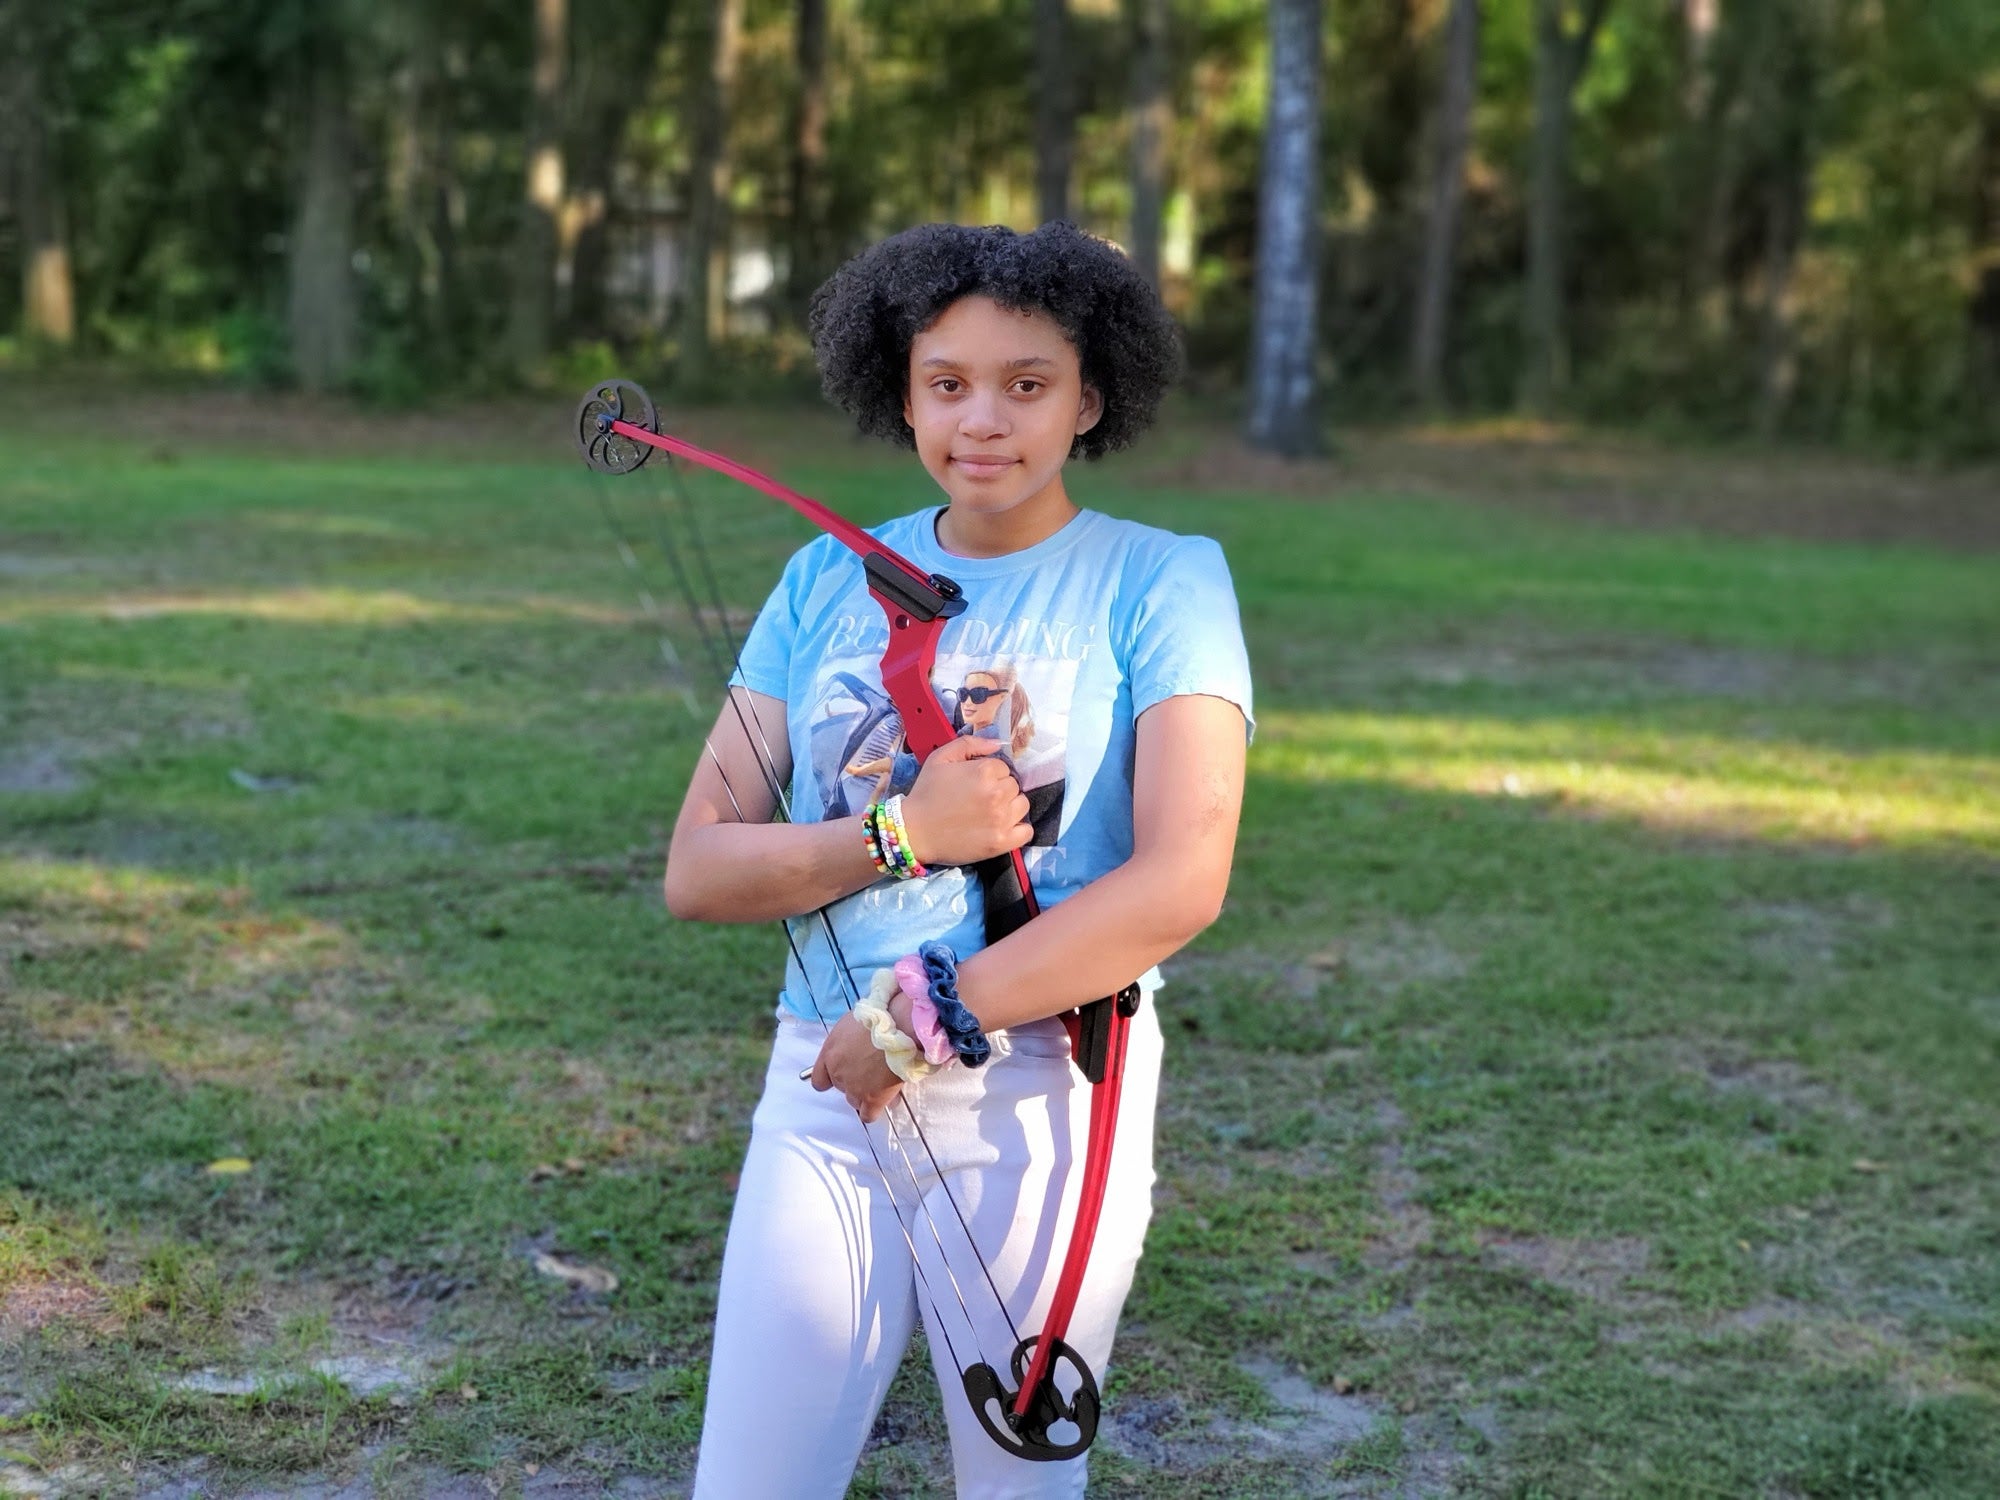 Alabama Student Named One of Top 10 Academic Archers in U.S.